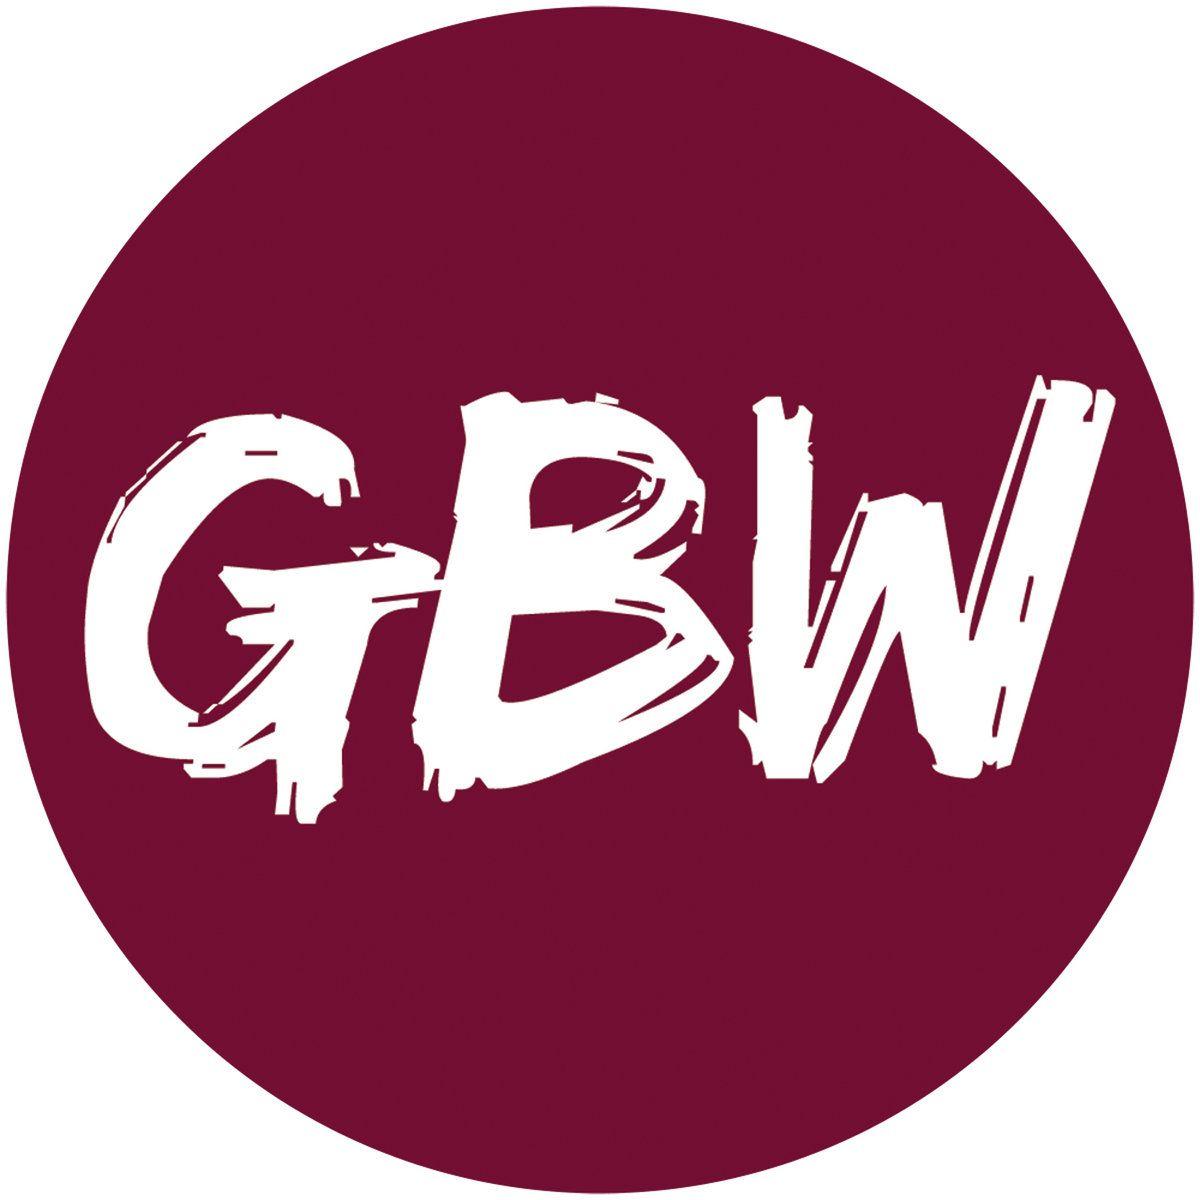 Gbw Logo - GBW 004 - The Generations EP (12